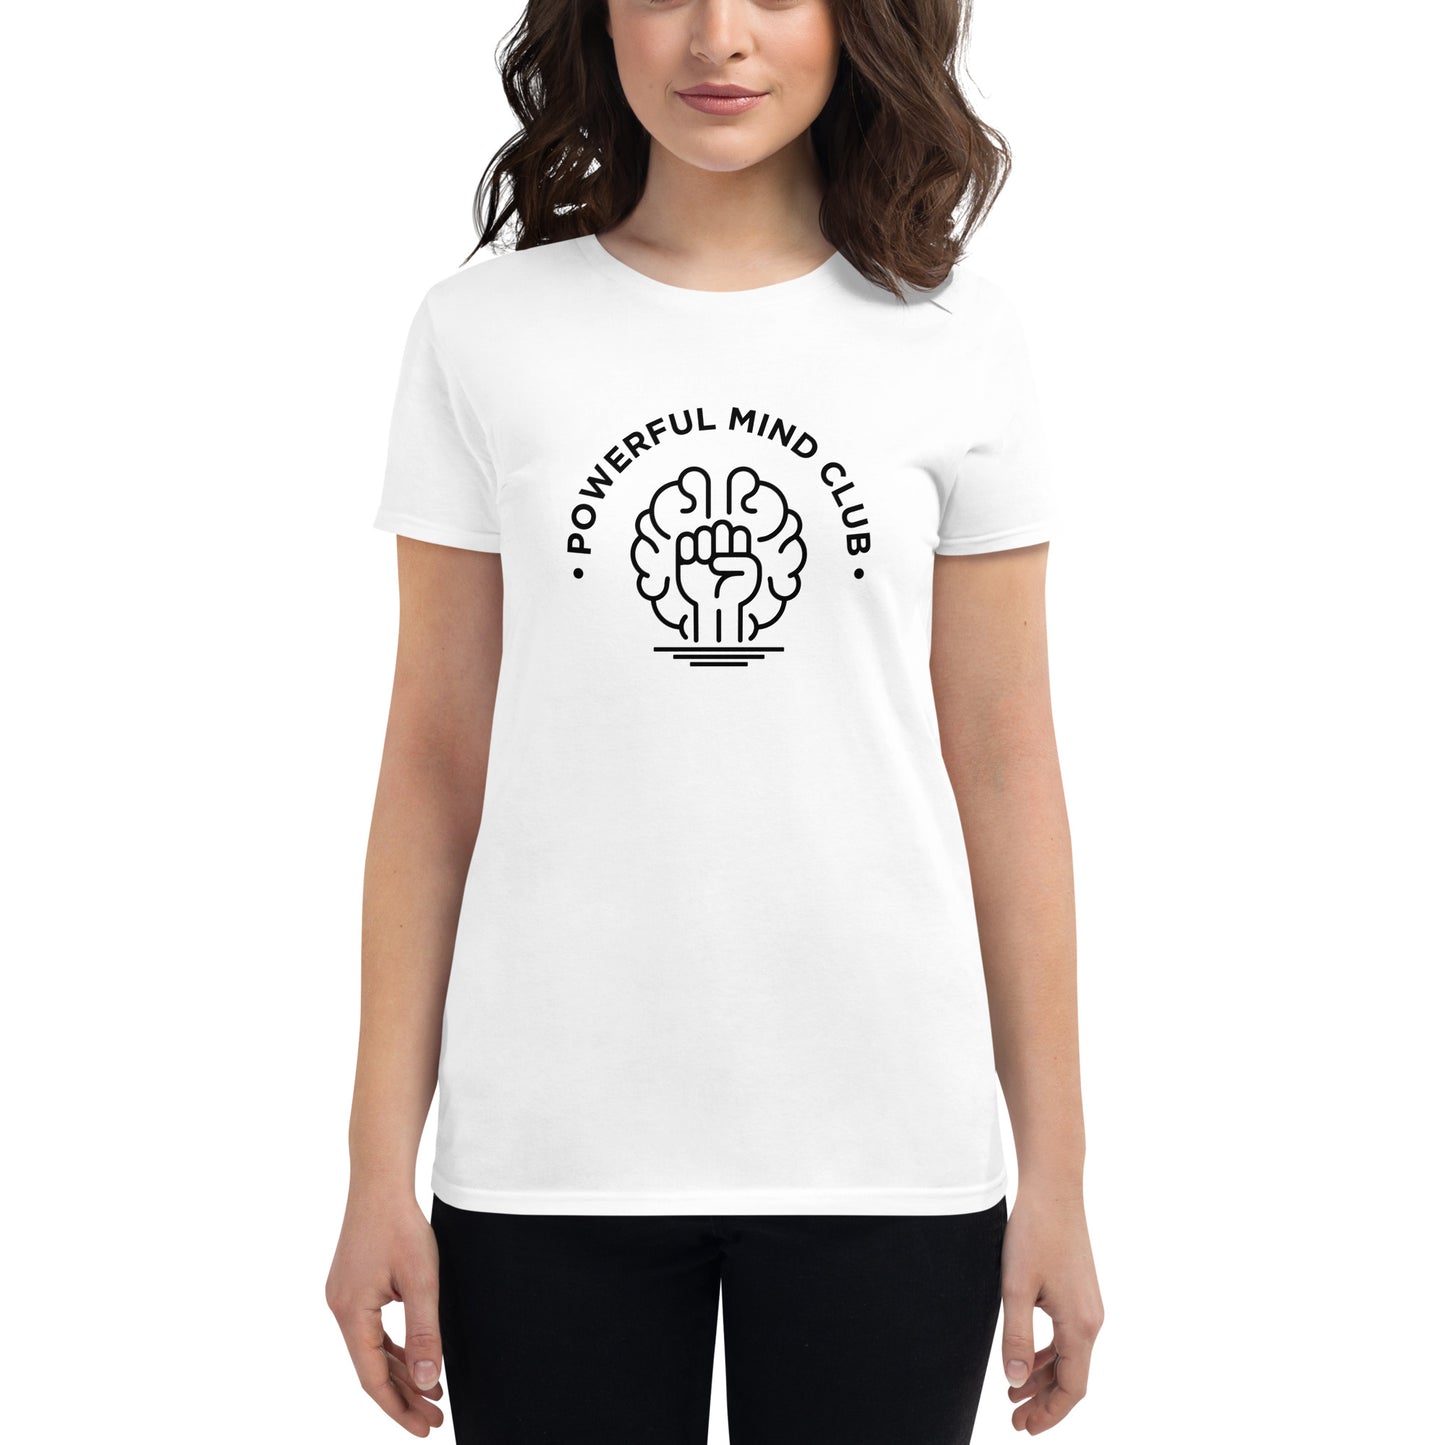 Powerful Mind Club™ Women's Fitted t-shirt